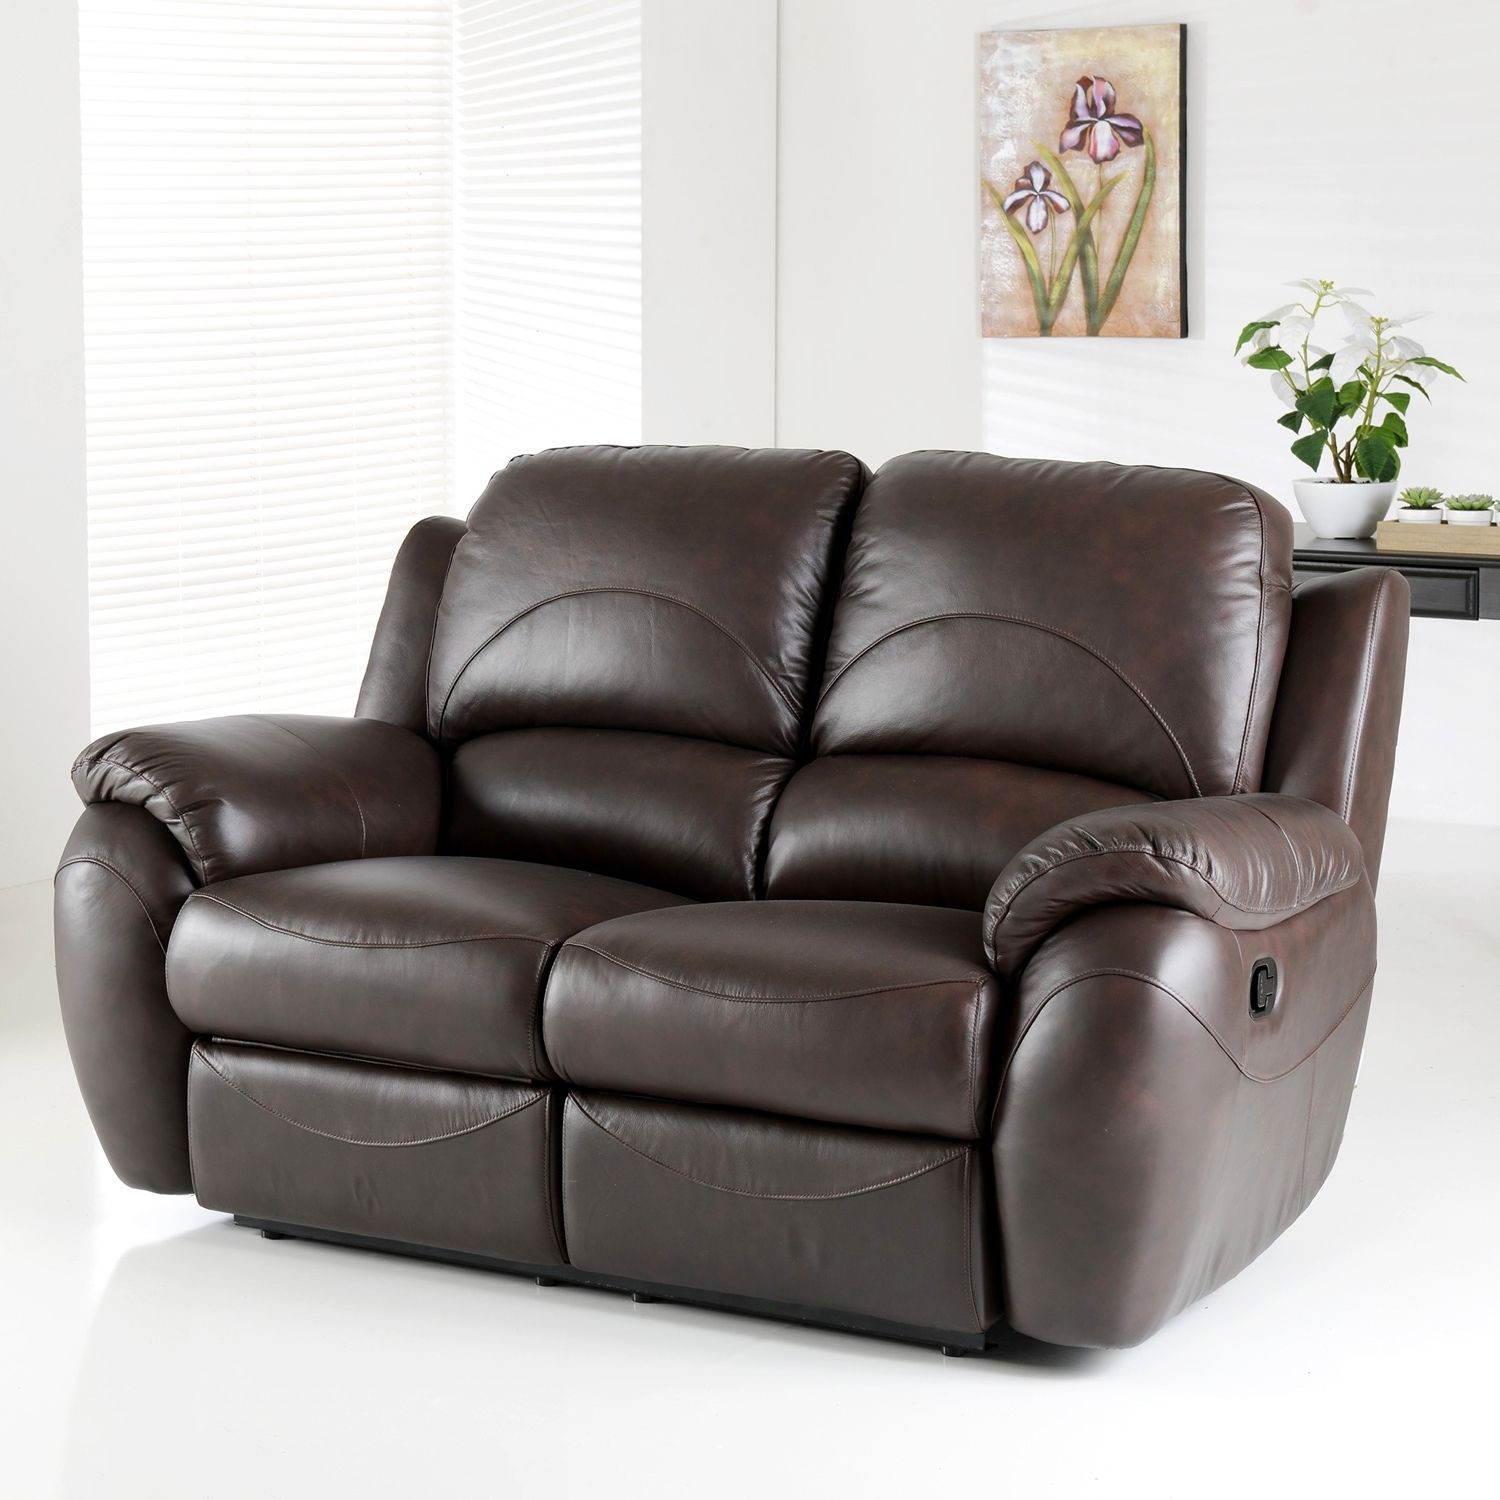 Most Popular 2 Seater Recliner Leather Sofas Inside Cheap Reclining Loveseat With Console Used Leather Recliner Chair (View 1 of 20)